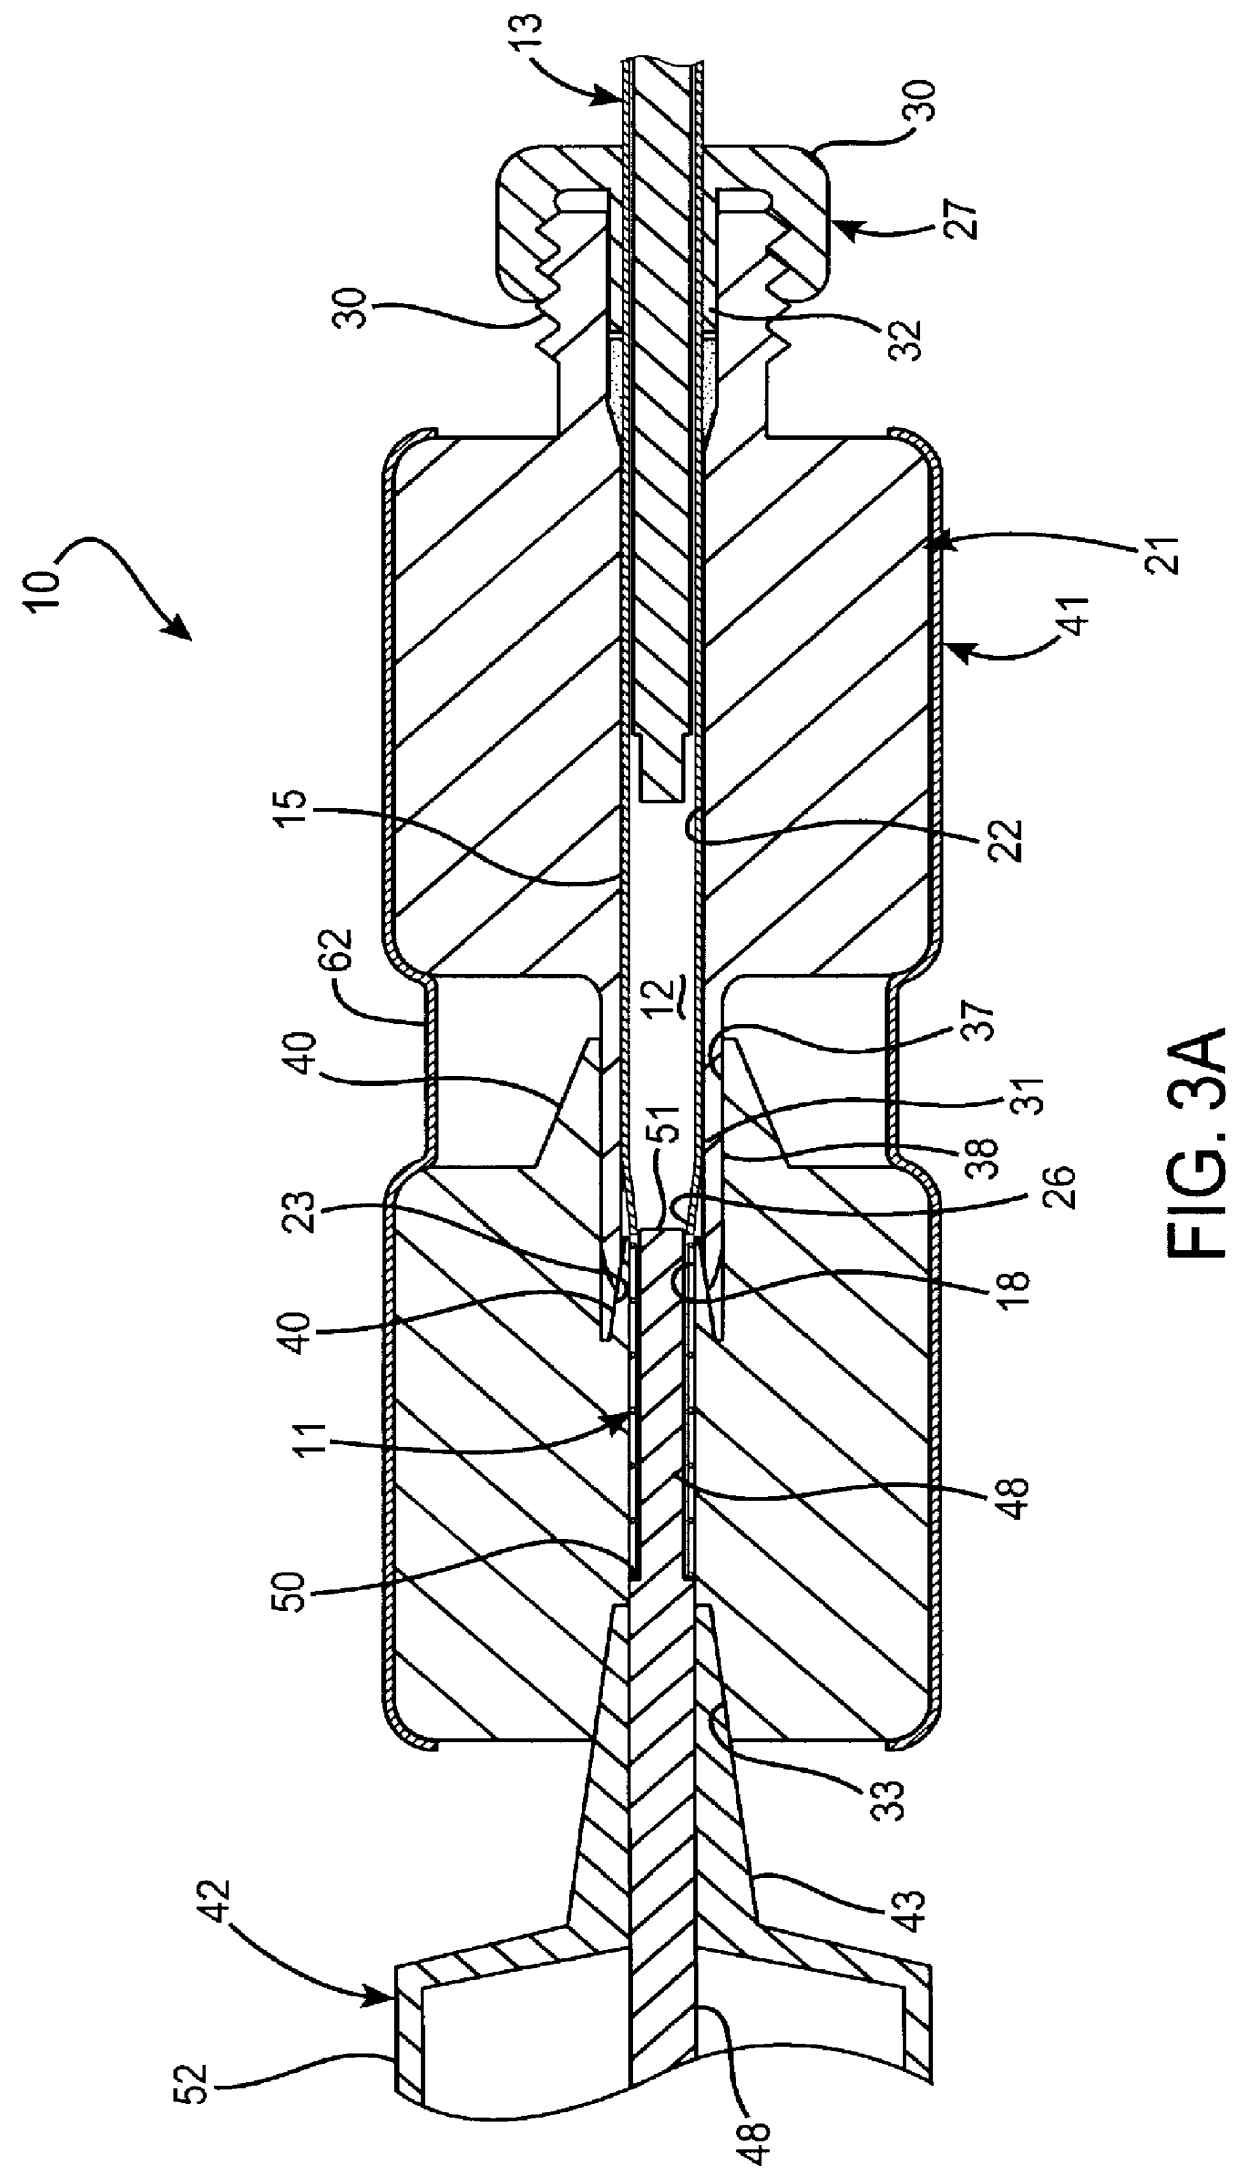 Stent loading assembly for a self-expanding stent